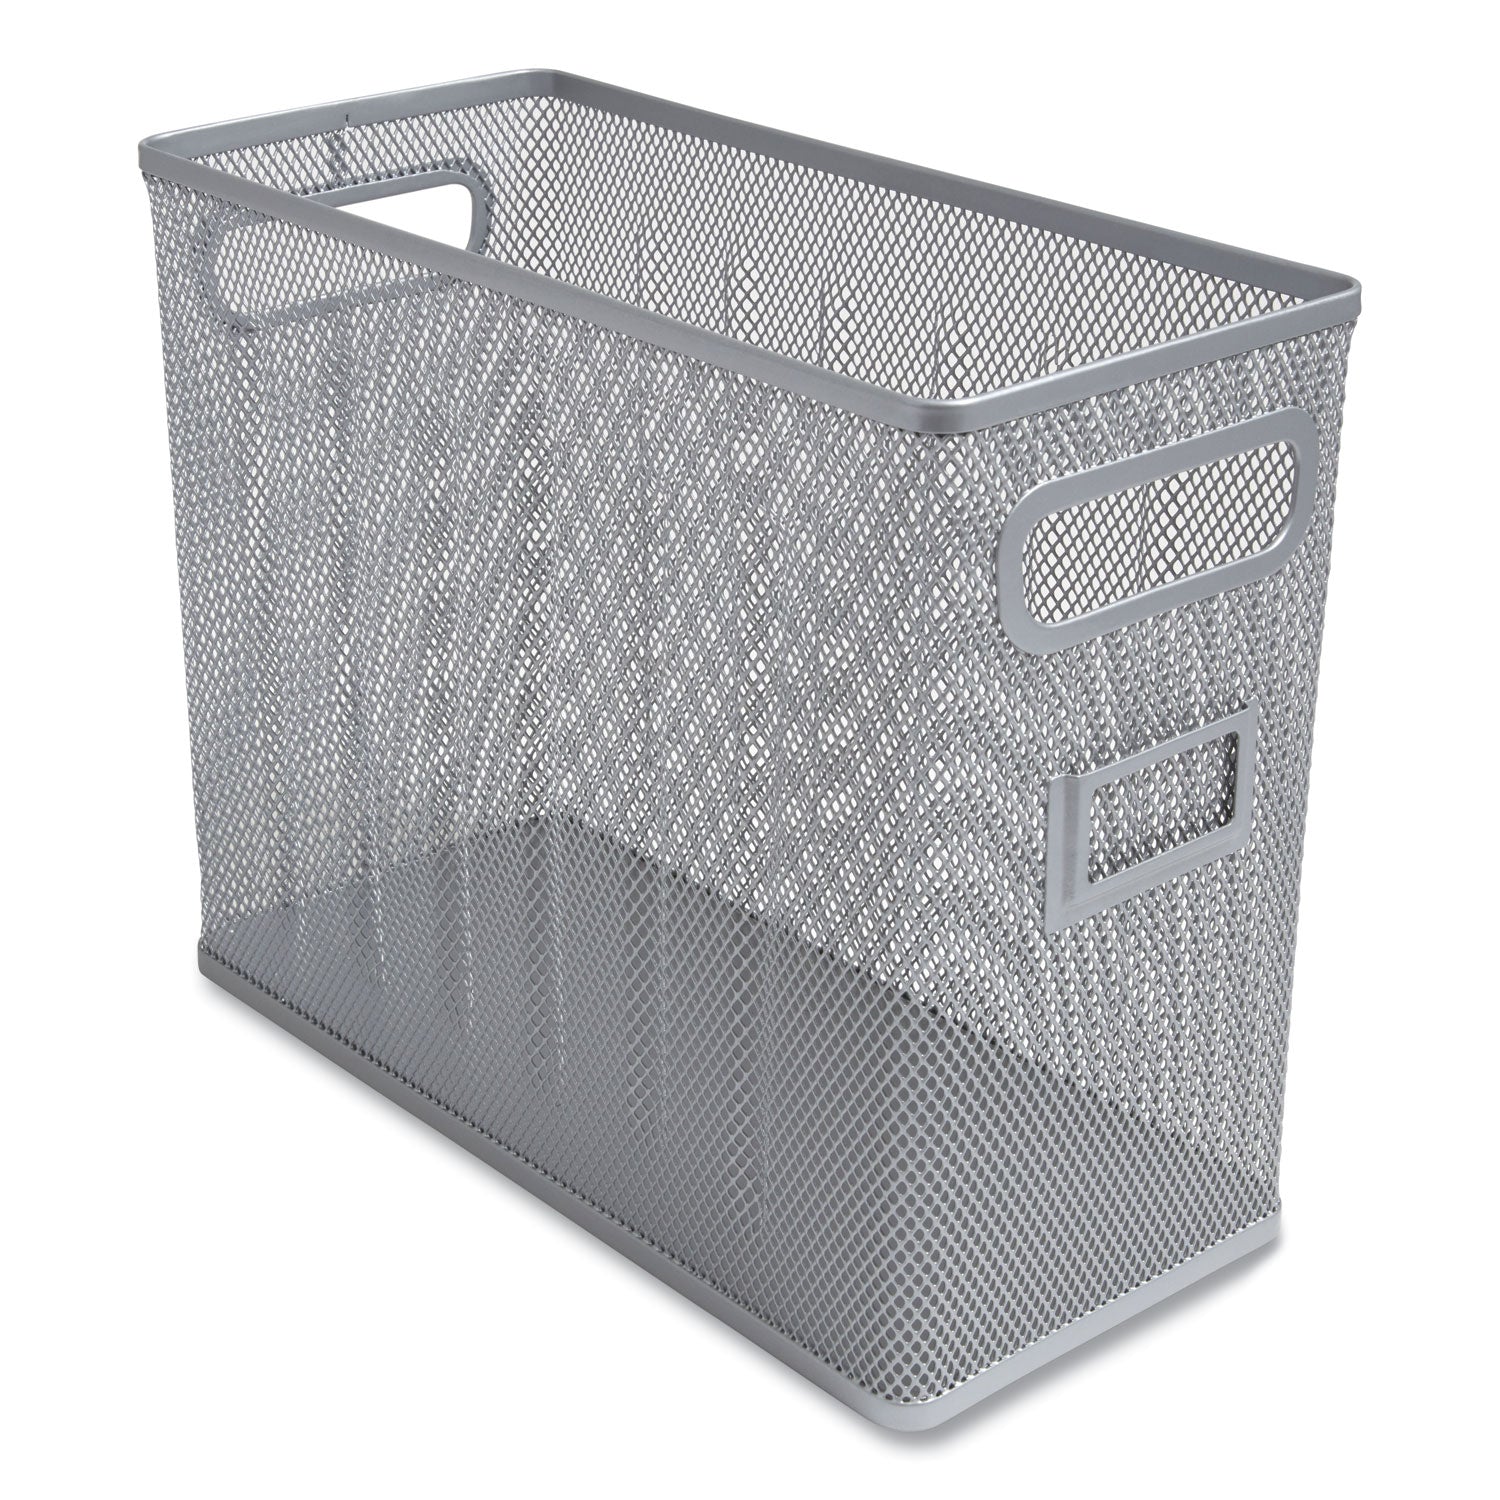 wire-mesh-box-style-vertical-document-organizer-1-section-letter-size-579-x-124-x-1016-silver_tud24402455 - 3